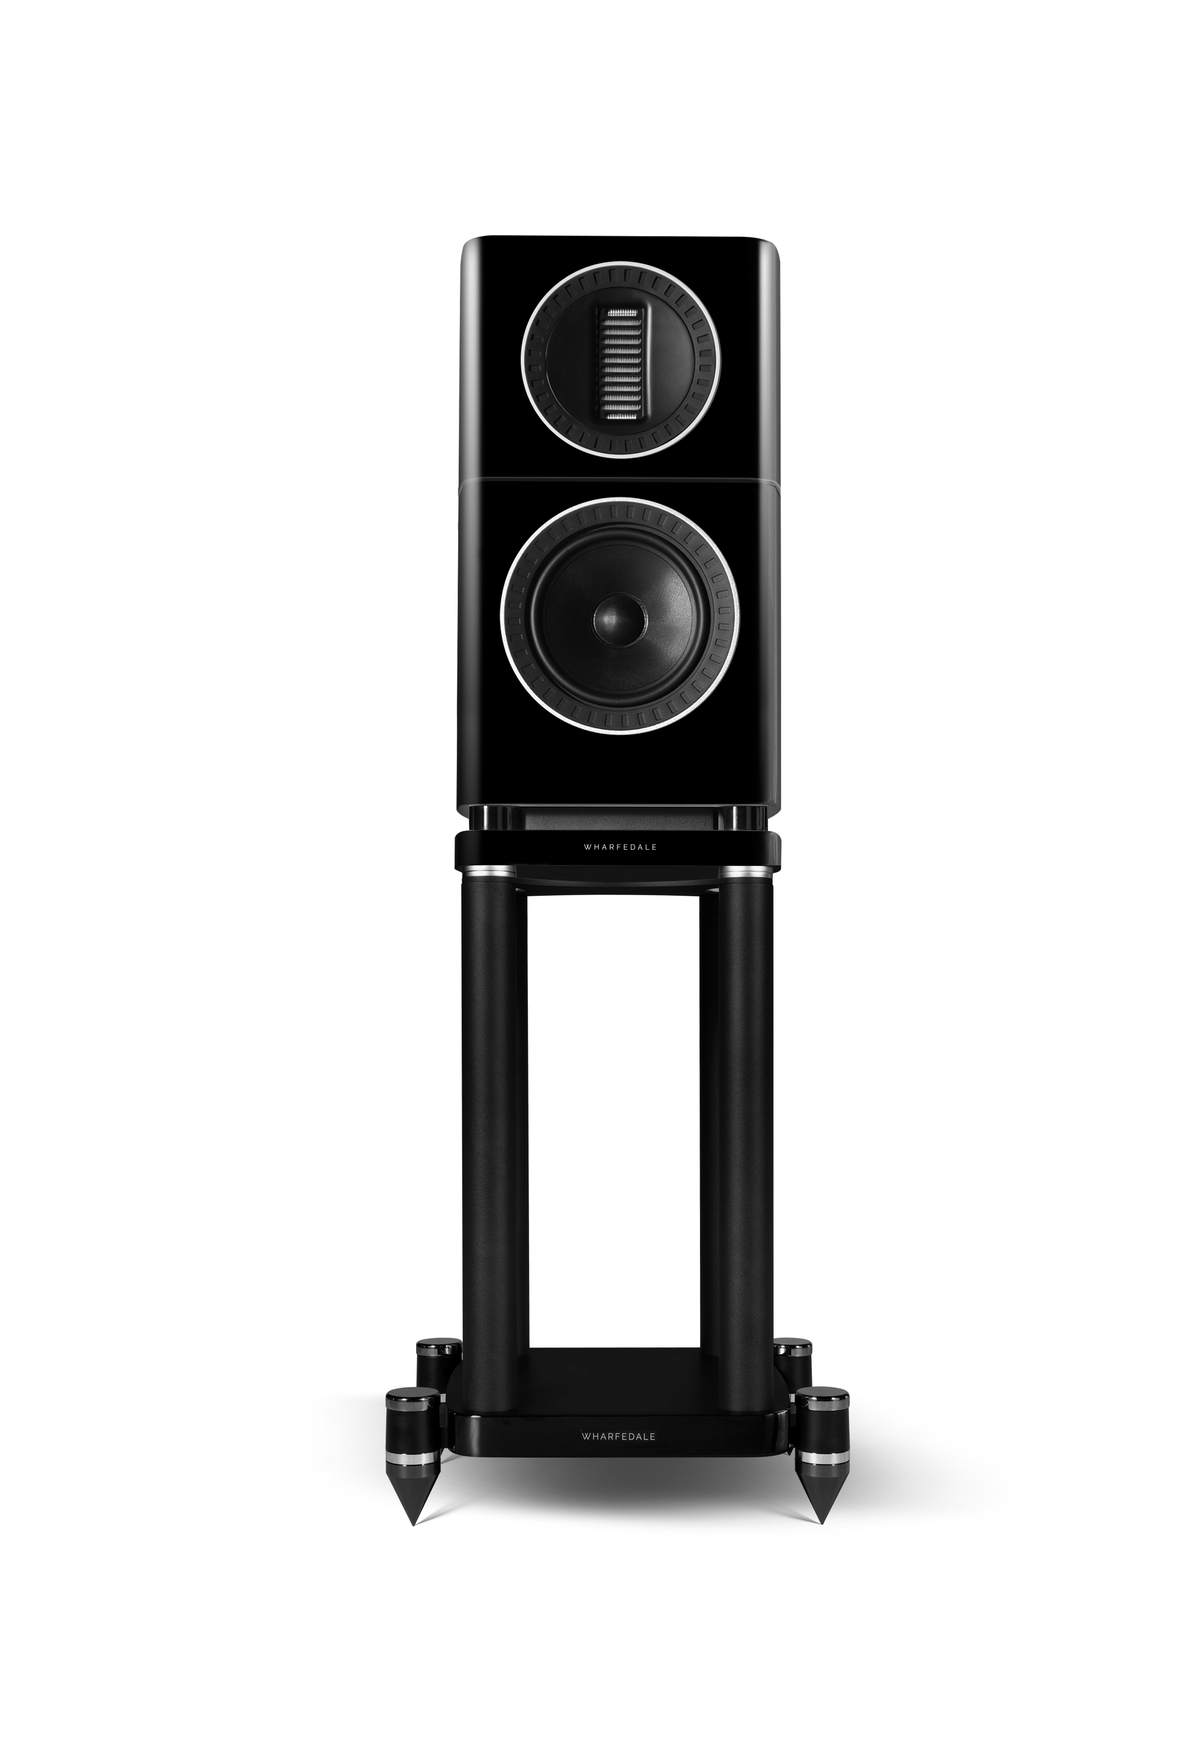 The Wharfedale ELYSIAN 1 Speaker Stands are specially designed for the ELYSIAN 1 loudspeaker, the more compact addition to the award-winning ELYSIAN series. Standing at the height of 476mm, the Wharfedale ELYSIAN 1 Speaker Stands’ are engineered to new levels of precision with laser cut from high carbon stainless steel